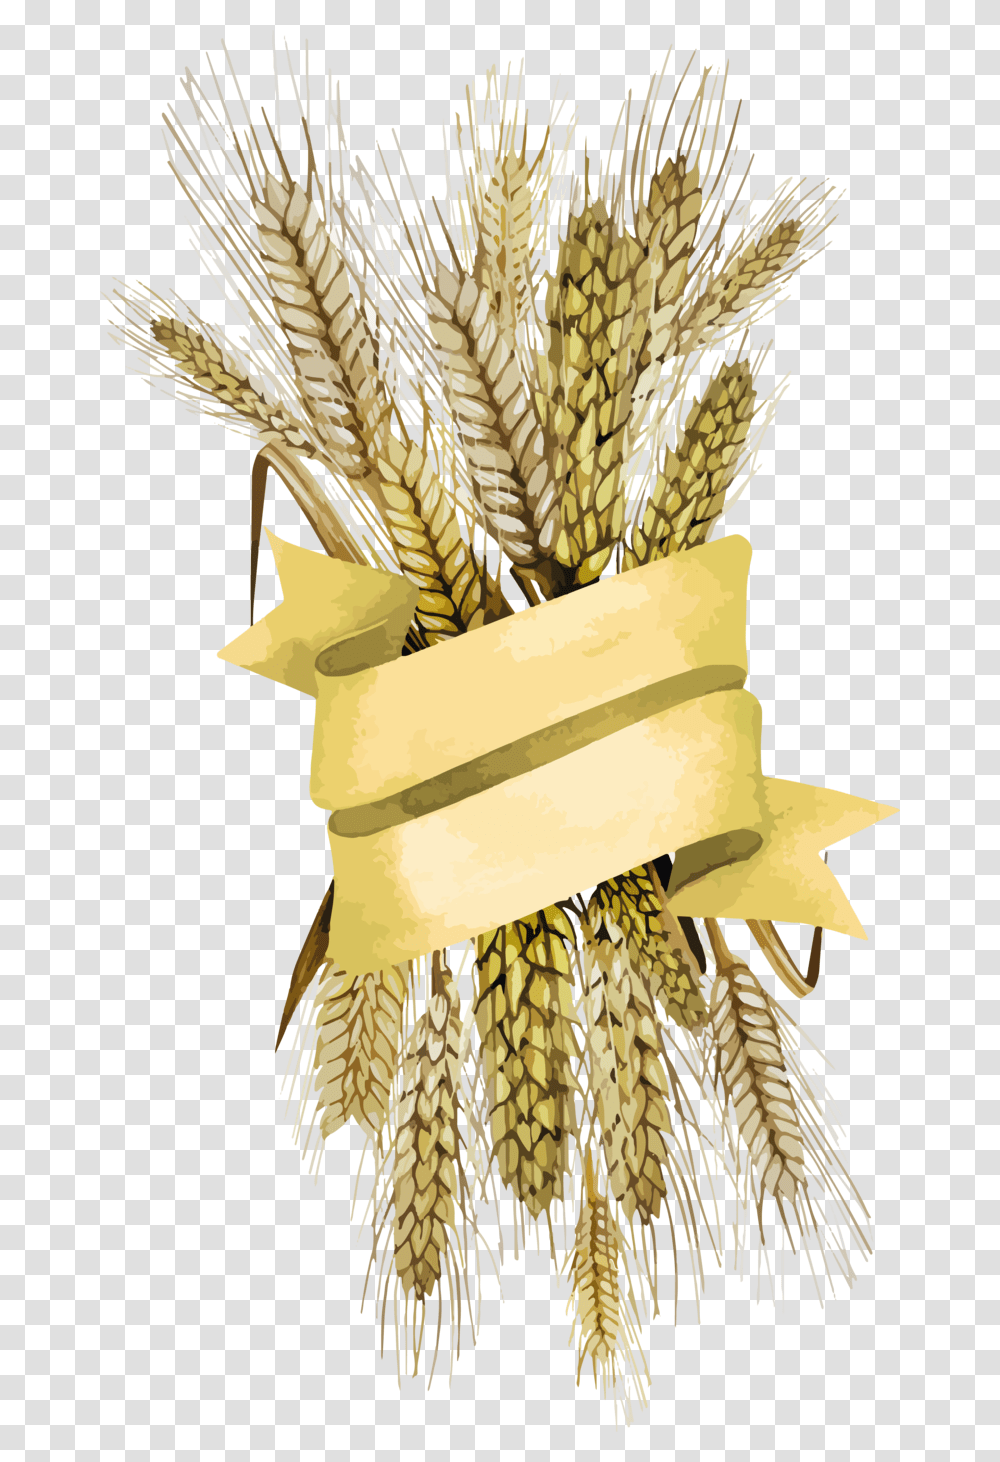 Background Wheat Background Free Wheat, Plant, Vegetable, Food, Bird Transparent Png